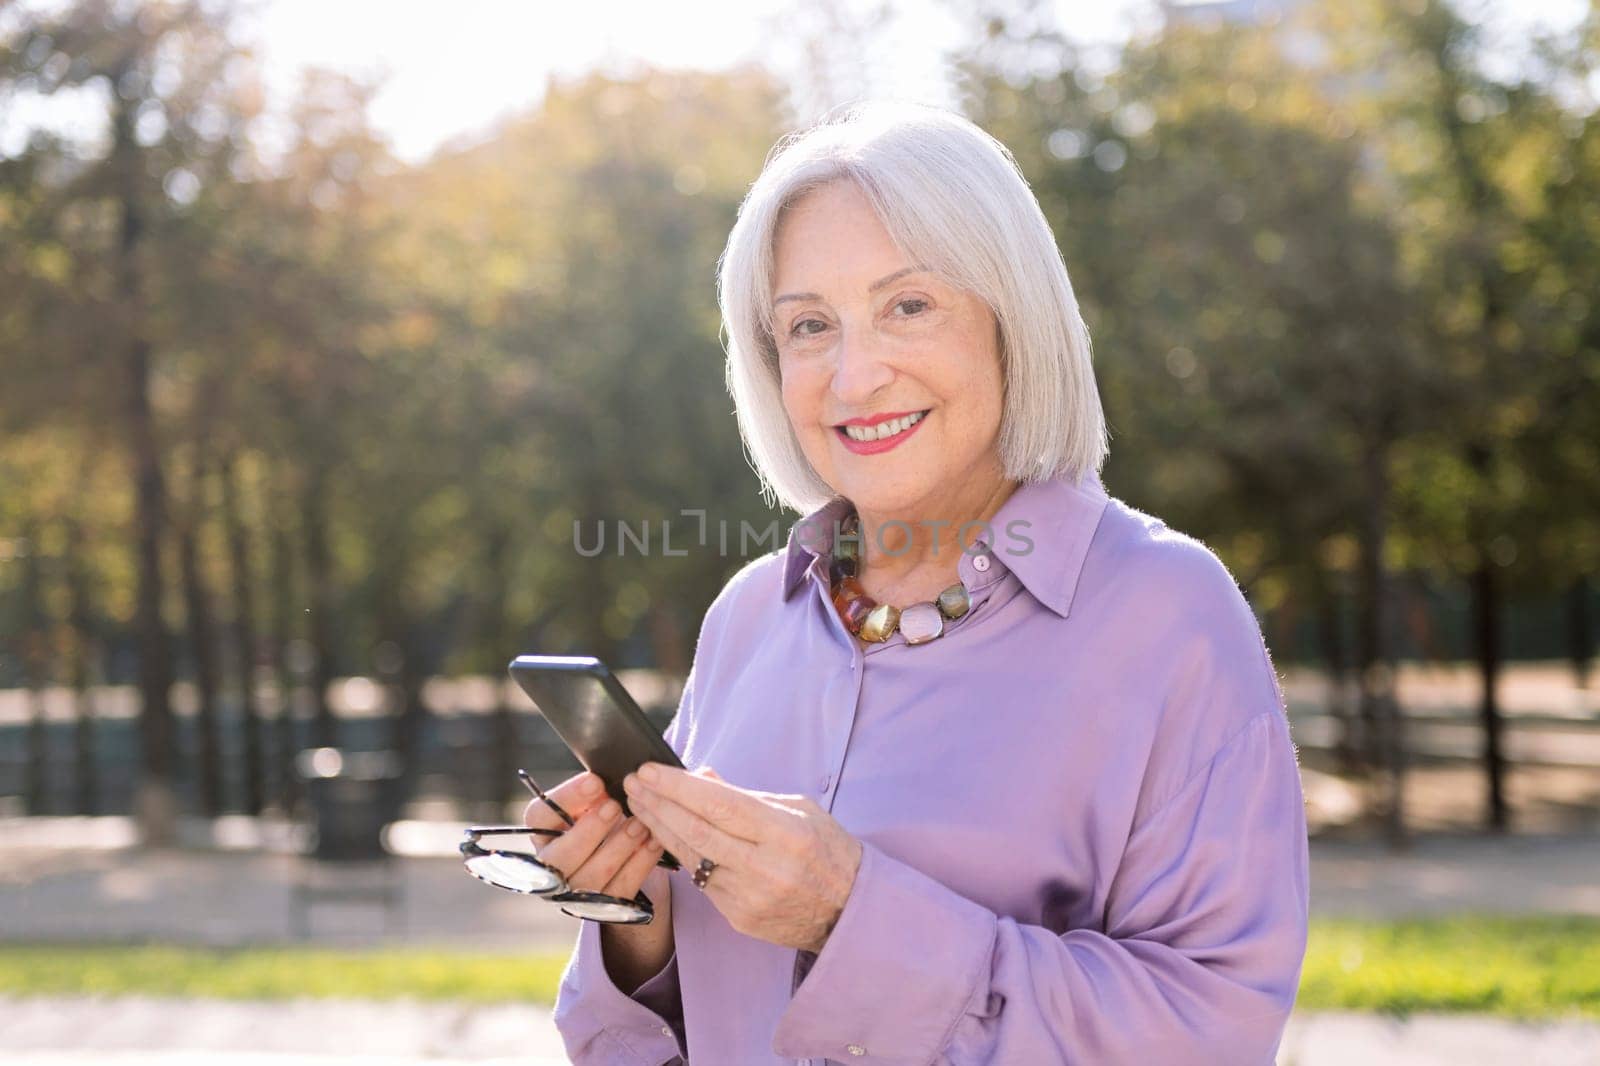 senior woman looking at camera smiling happy using mobile phone outdoors, concept of technology and elderly people leisure, copy space for text